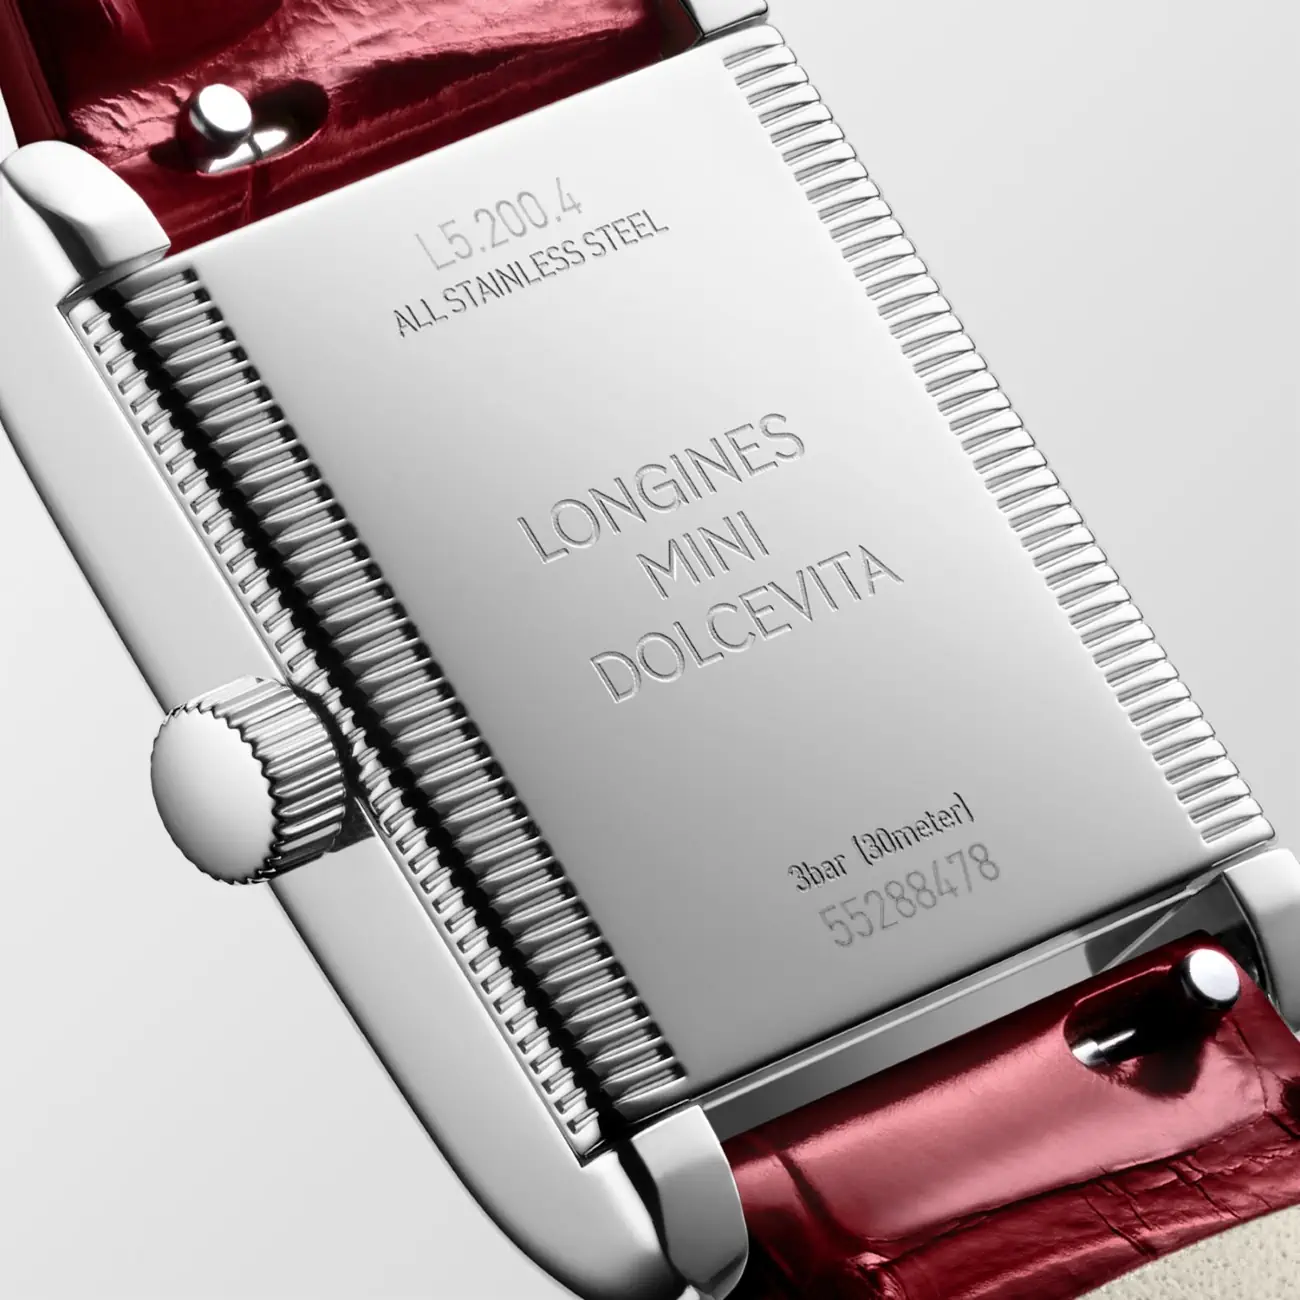 Elegance in the smallest detail with Longines Mini DolceVita